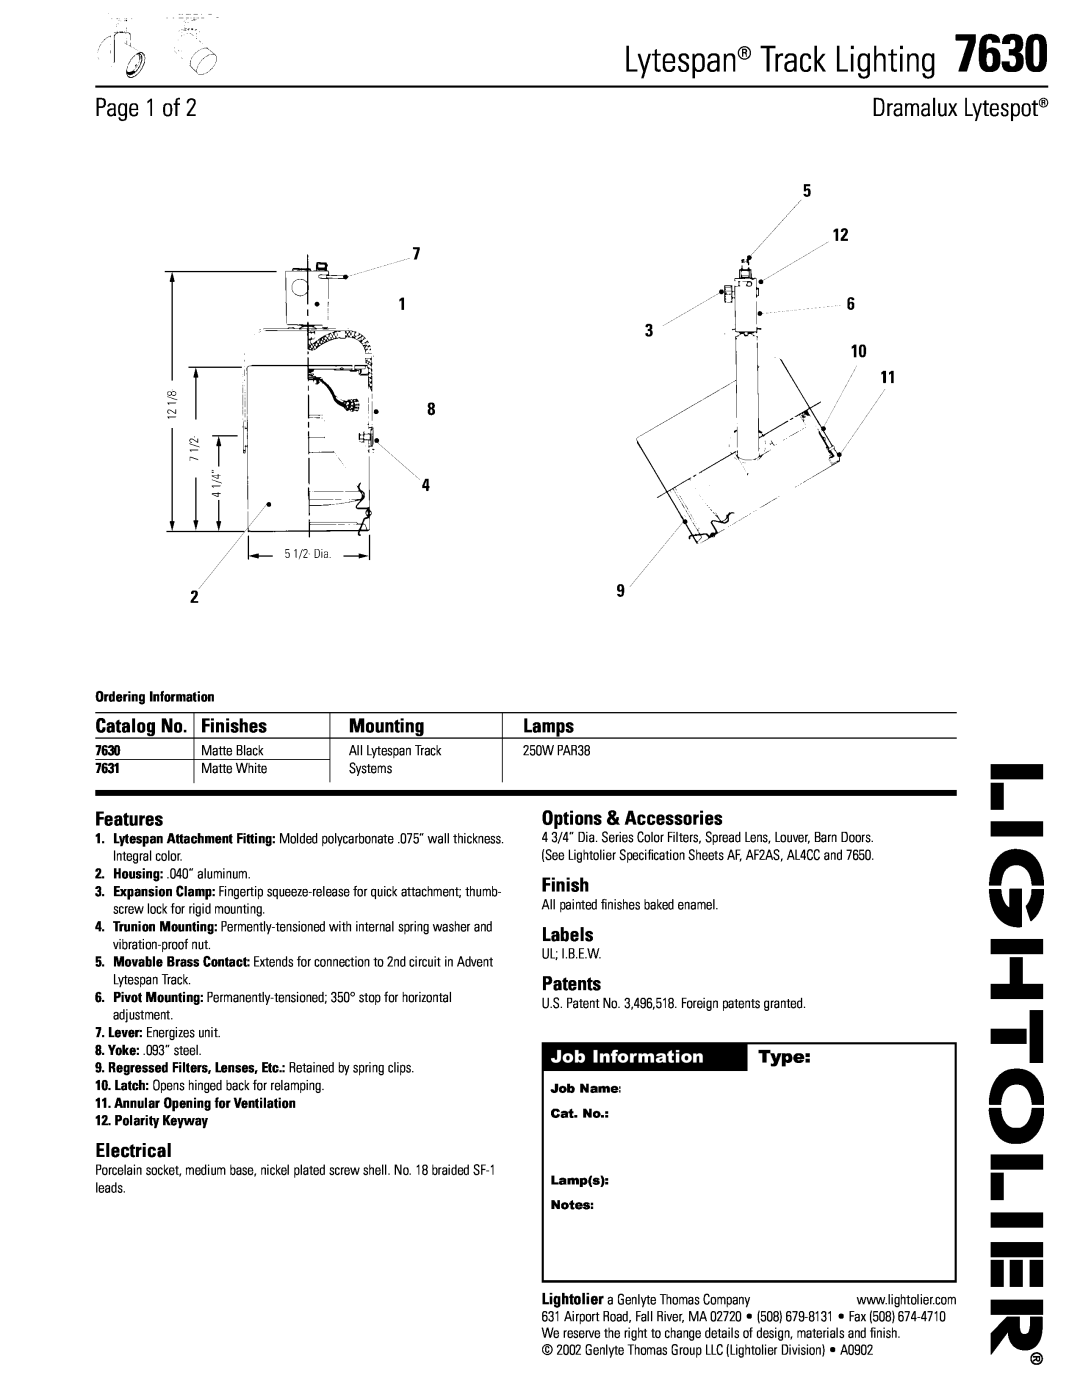 Lightolier 7630 specifications Page 1 of, Finishes, Mounting, Lamps, Features, Electrical, Options & Accessories, Labels 